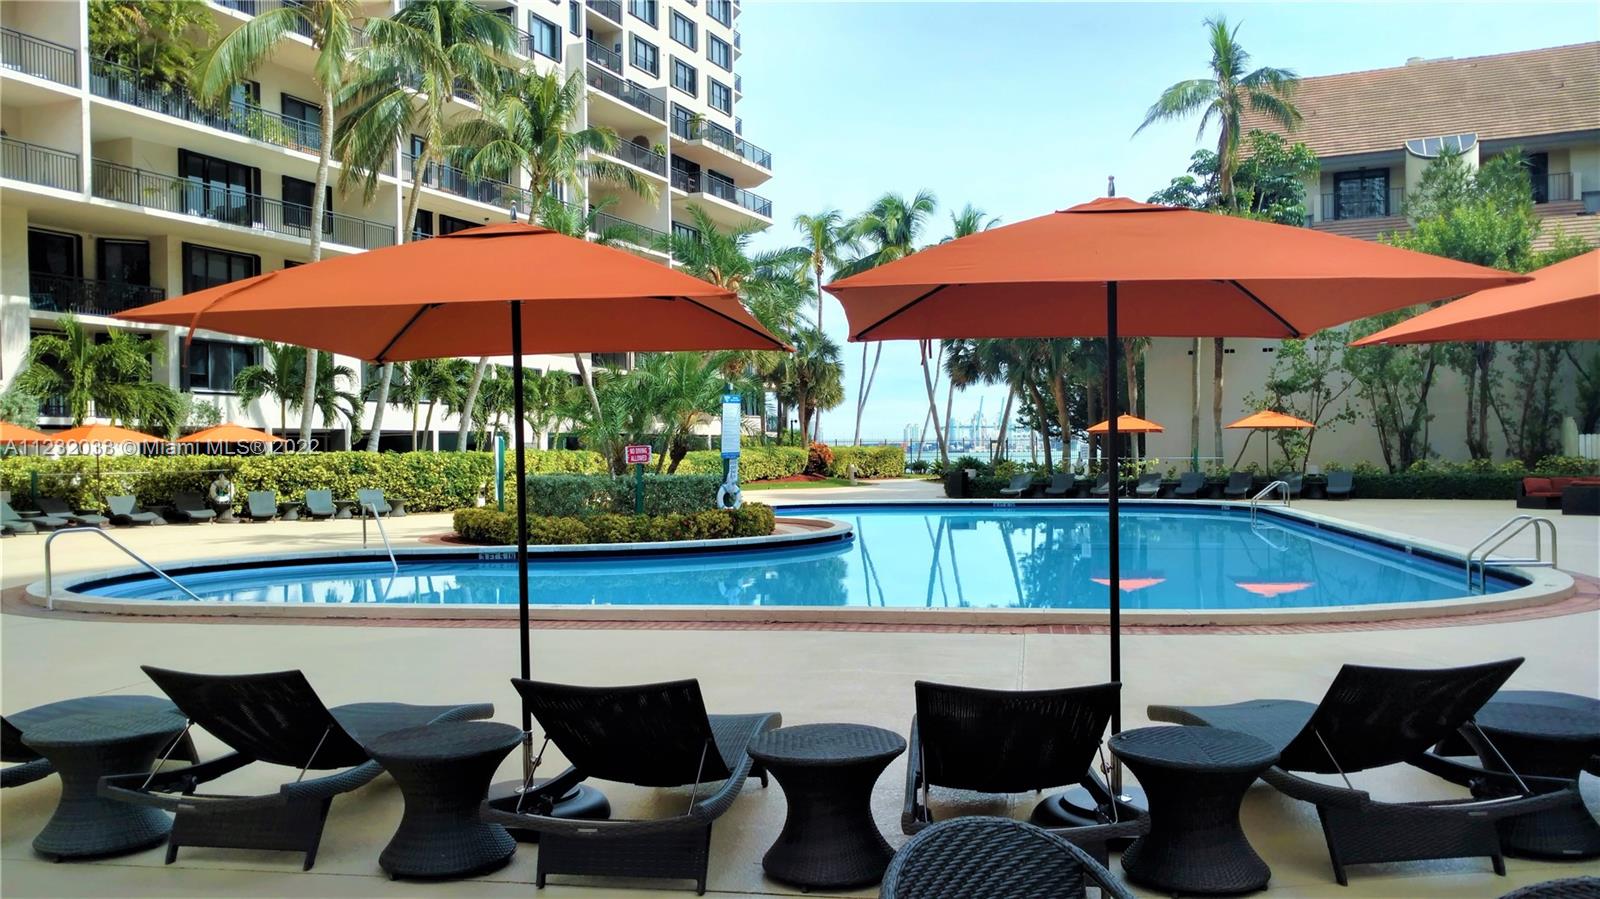 a view of swimming pool with chairs and an umbrella